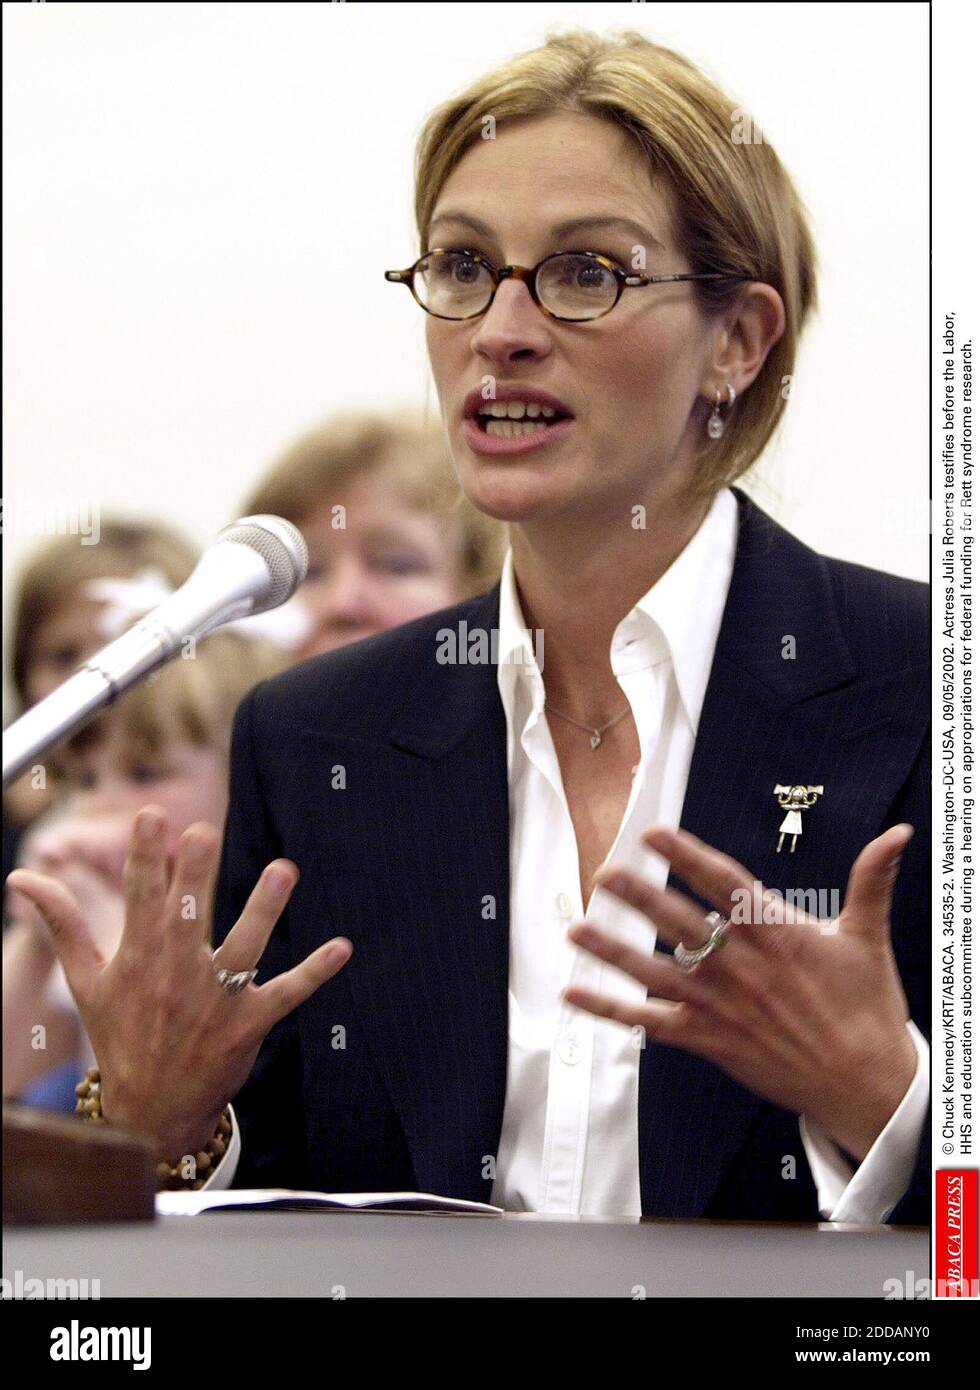 NO FILM, NO VIDEO, NO TV, NO DOCUMENTARY - © Chuck Kennedy/KRT/ABACA. 34535-2. Washington-DC-USA, 09/05/2002. Actress Julia Roberts testifies before the Labor, HHS and education subcommittee during a hearing on appropriations for federal funding for Rett syndrome research. Stock Photo